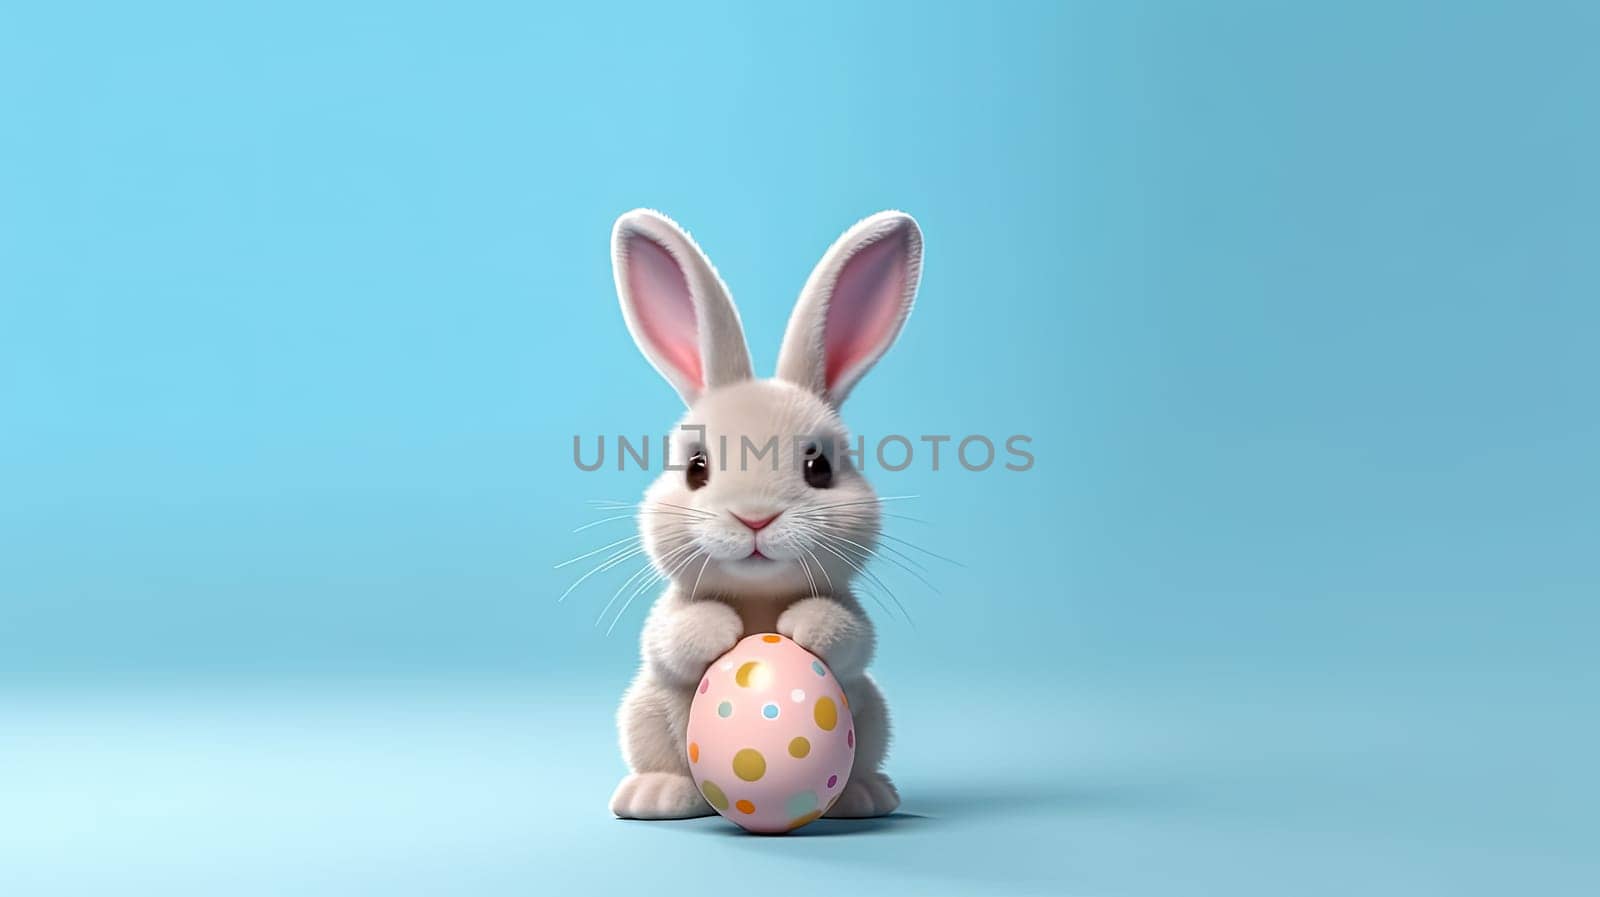 The Easter bunny is happy, sitting on colored paper by Alla_Morozova93